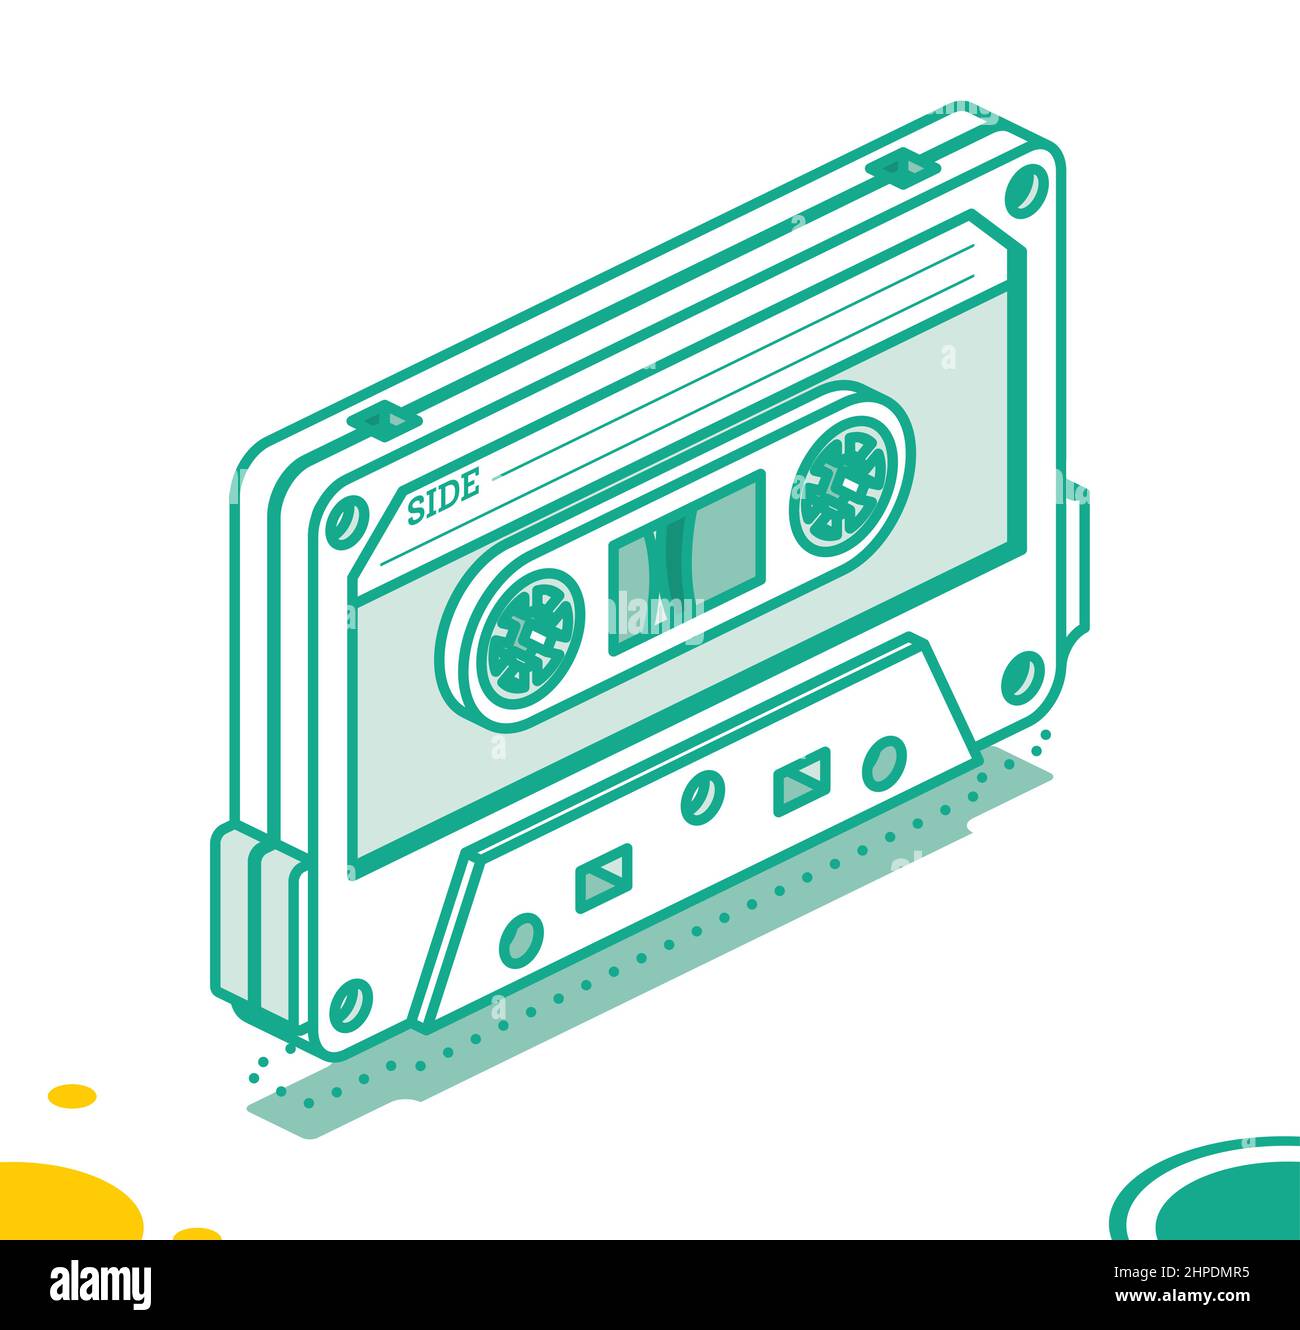 Retro Audio Cassette Tape. Isometric Outline Music Concept. Retro Device from 80s and 90s Isolated on White. Vector Illustration. Stock Vector